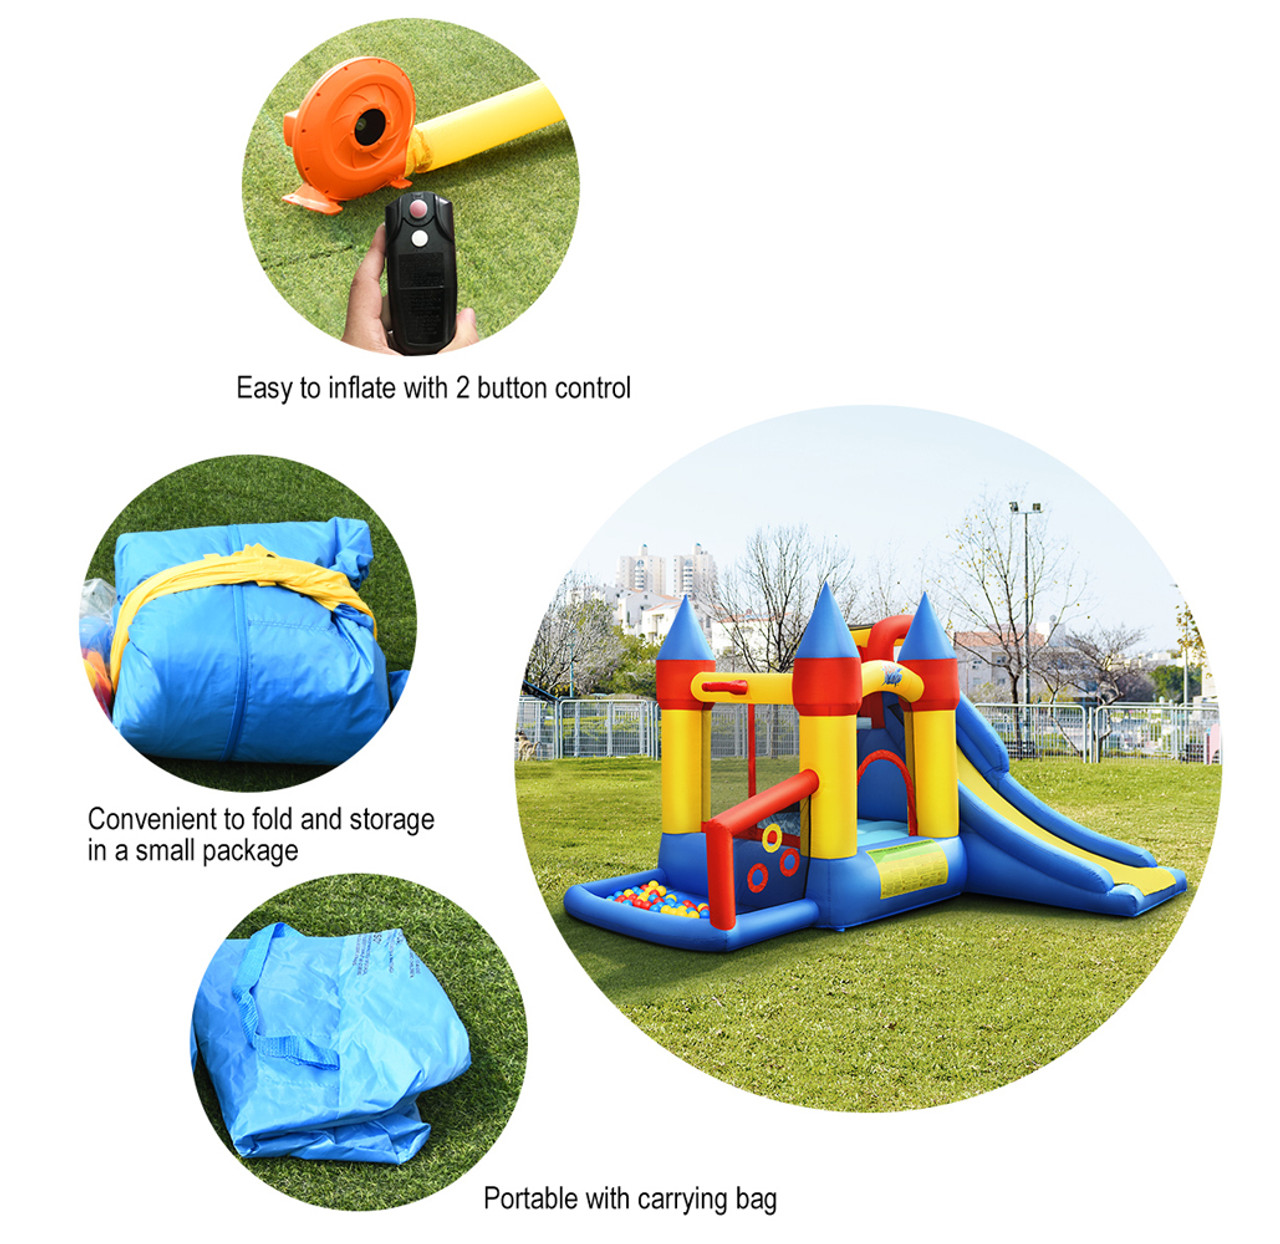 Castle Slide Ball Pit Inflatable Bounce House with Balls & 780W Blower product image